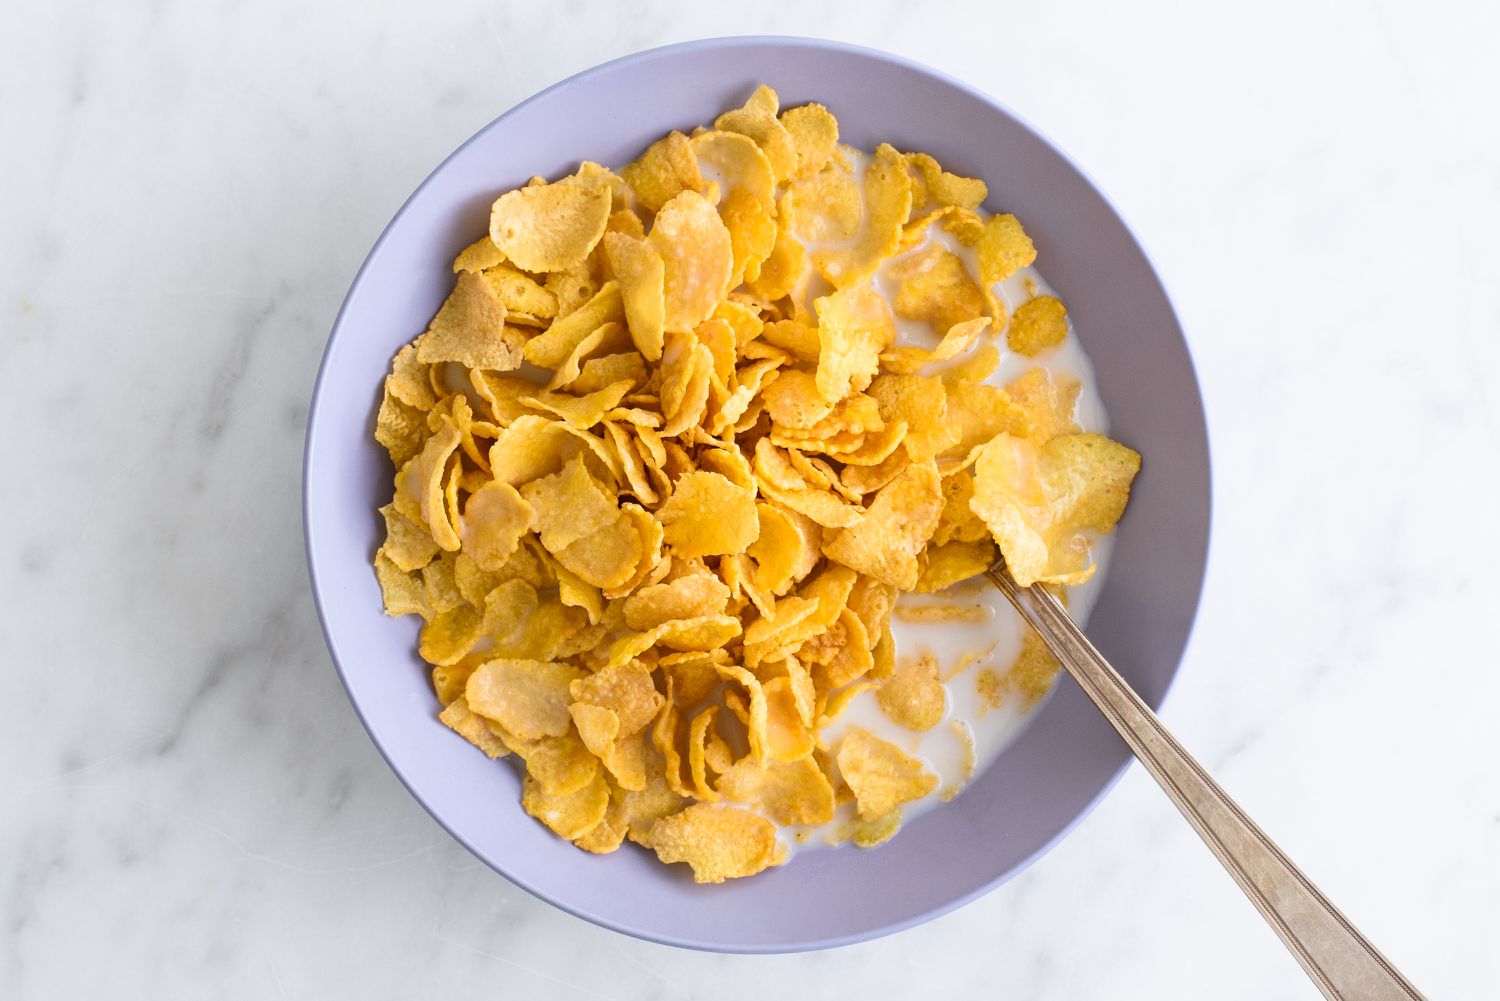 15-nutrition-facts-corn-flakes